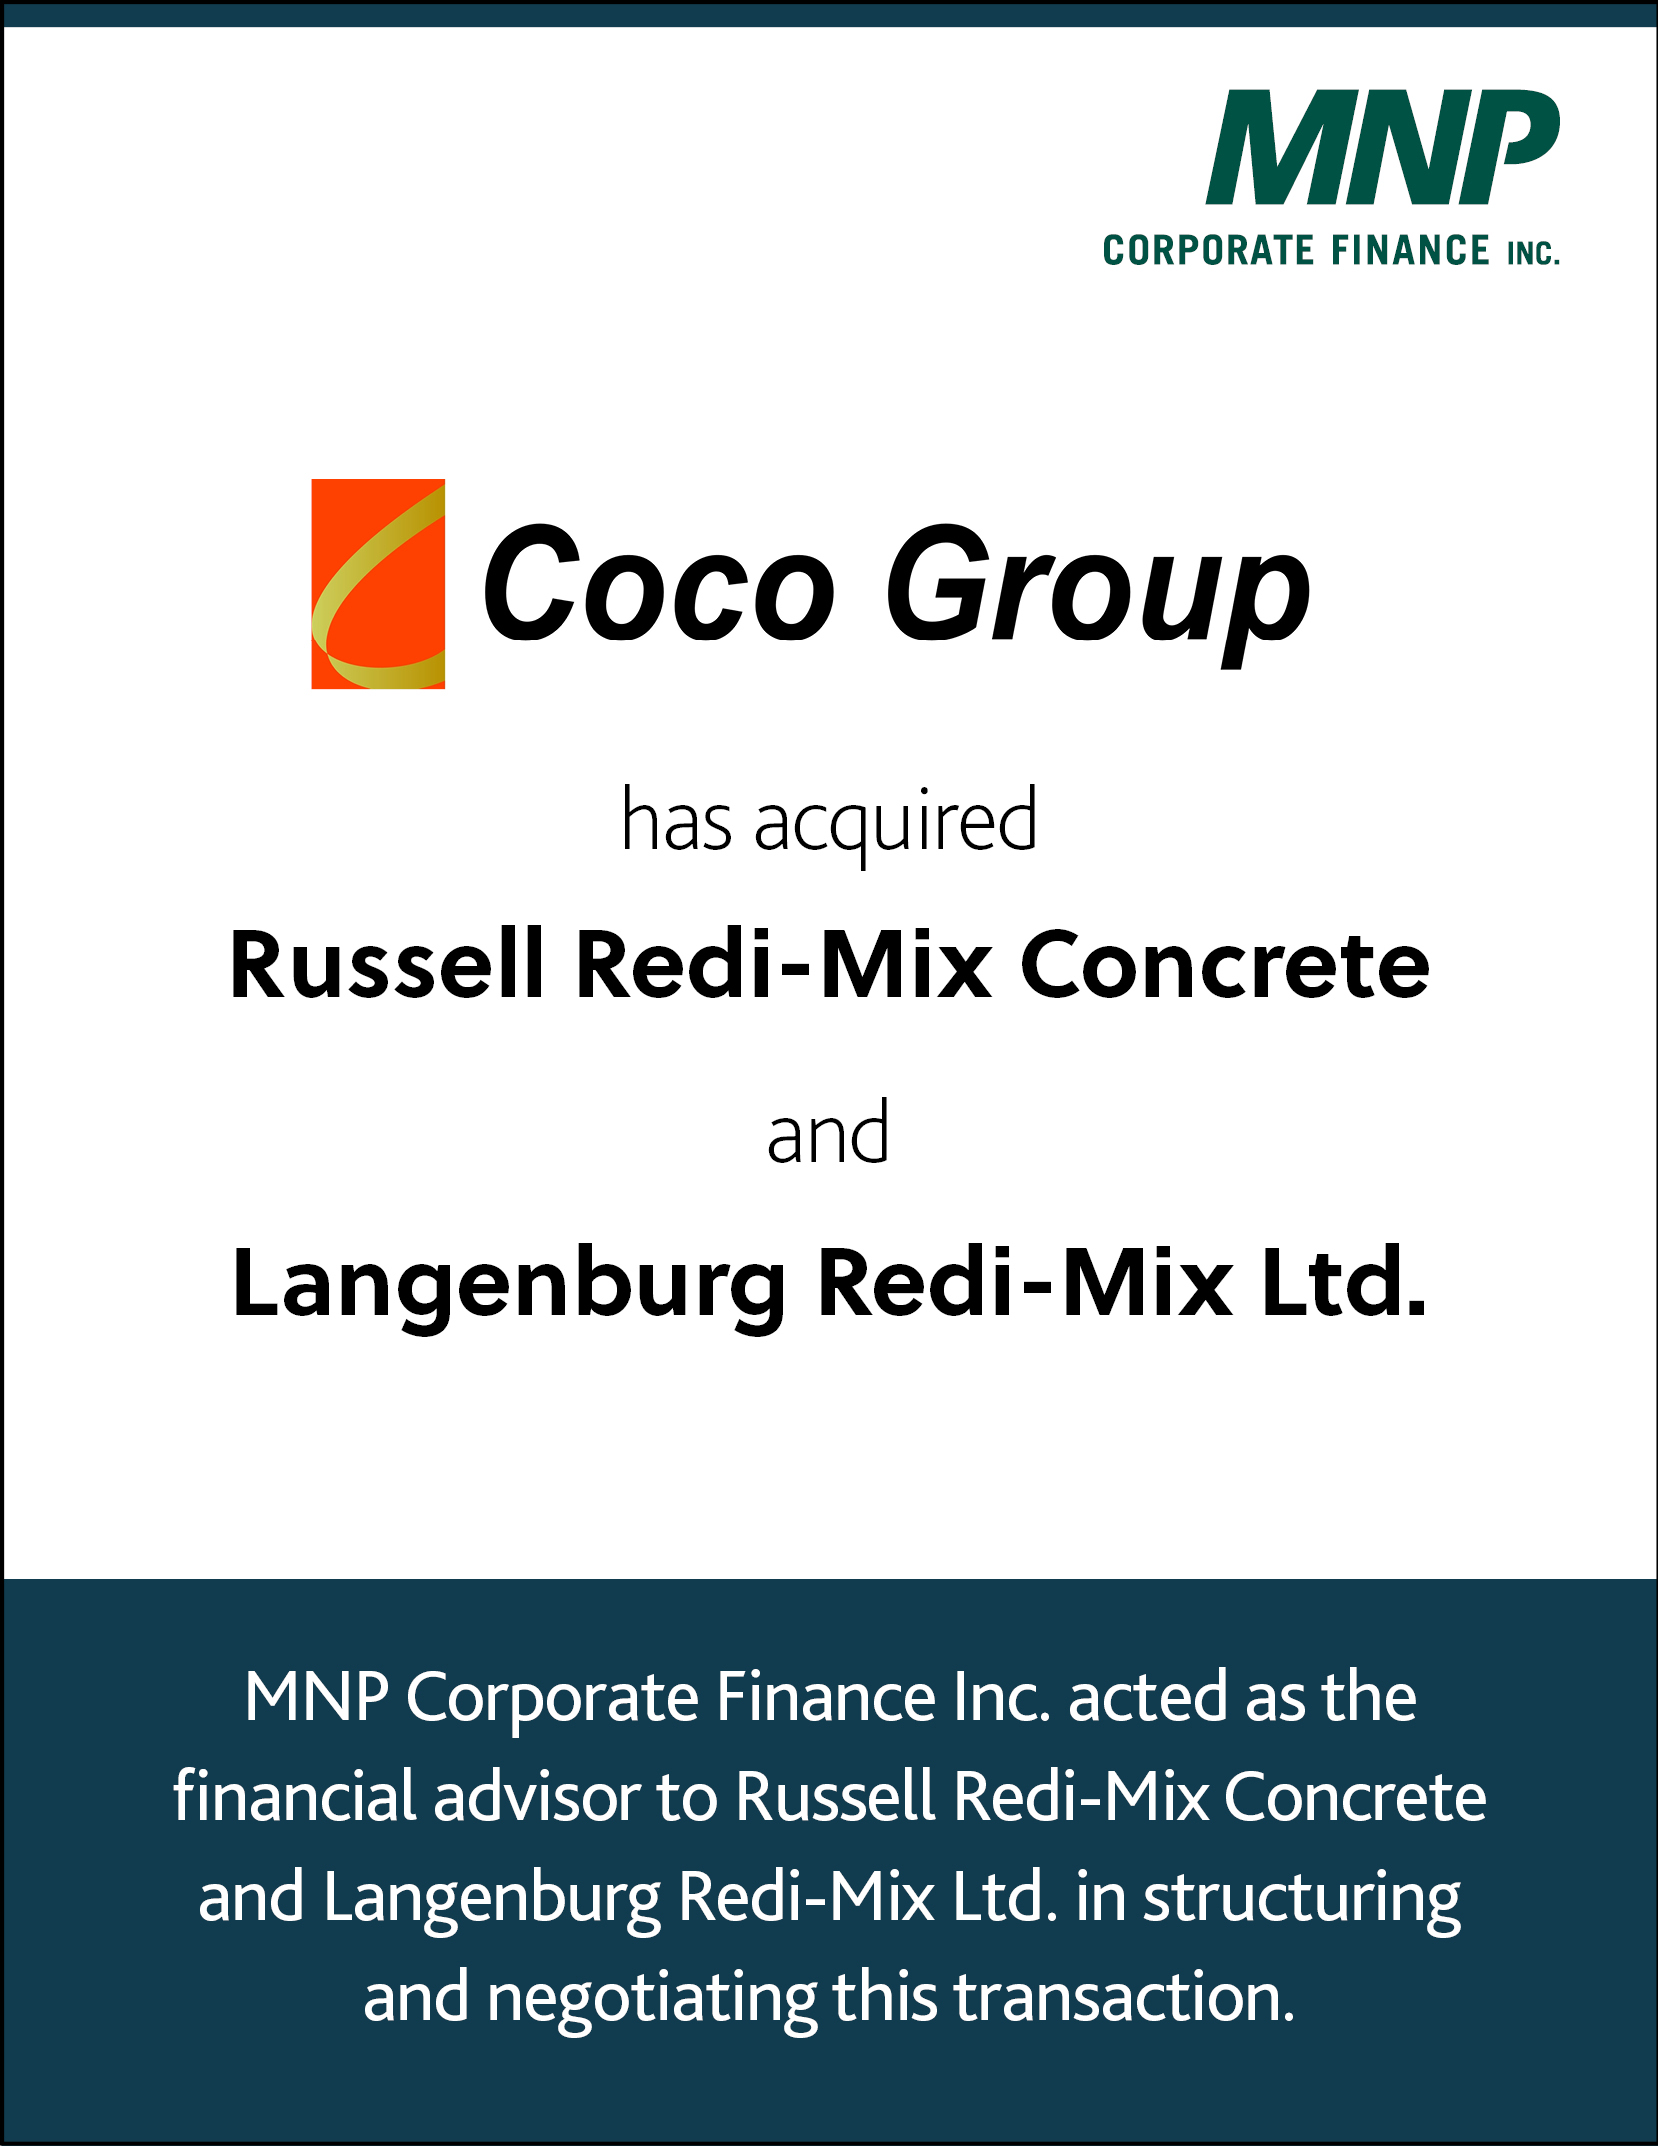 Coco Group had acquired Russell Redi-Mix Concrete and Langenburg Redi-Mix Ltd 